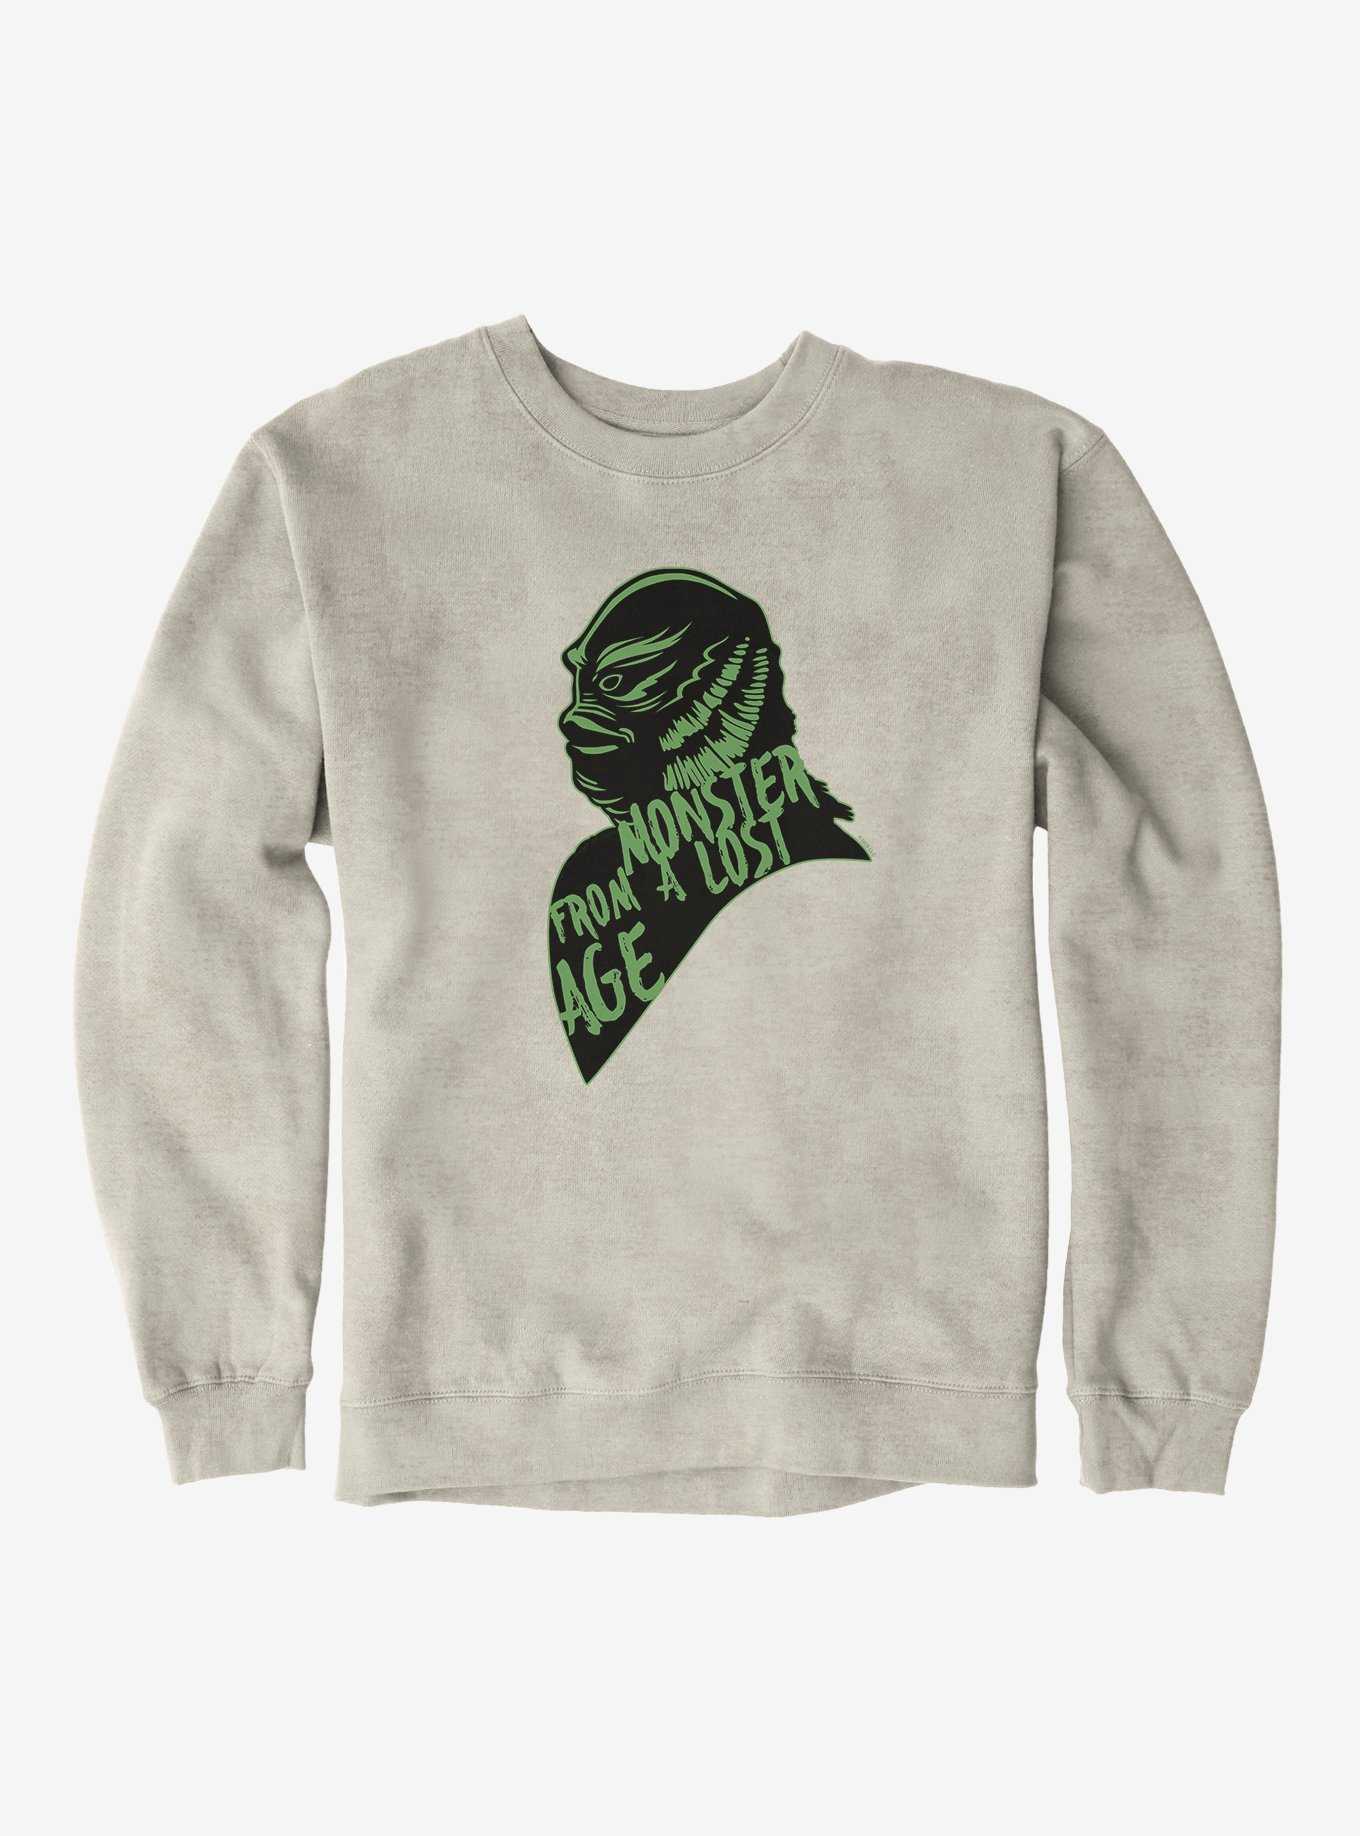 Universal Monsters Creature From The Black Lagoon Monster From A Lost Age Sweatshirt, , hi-res